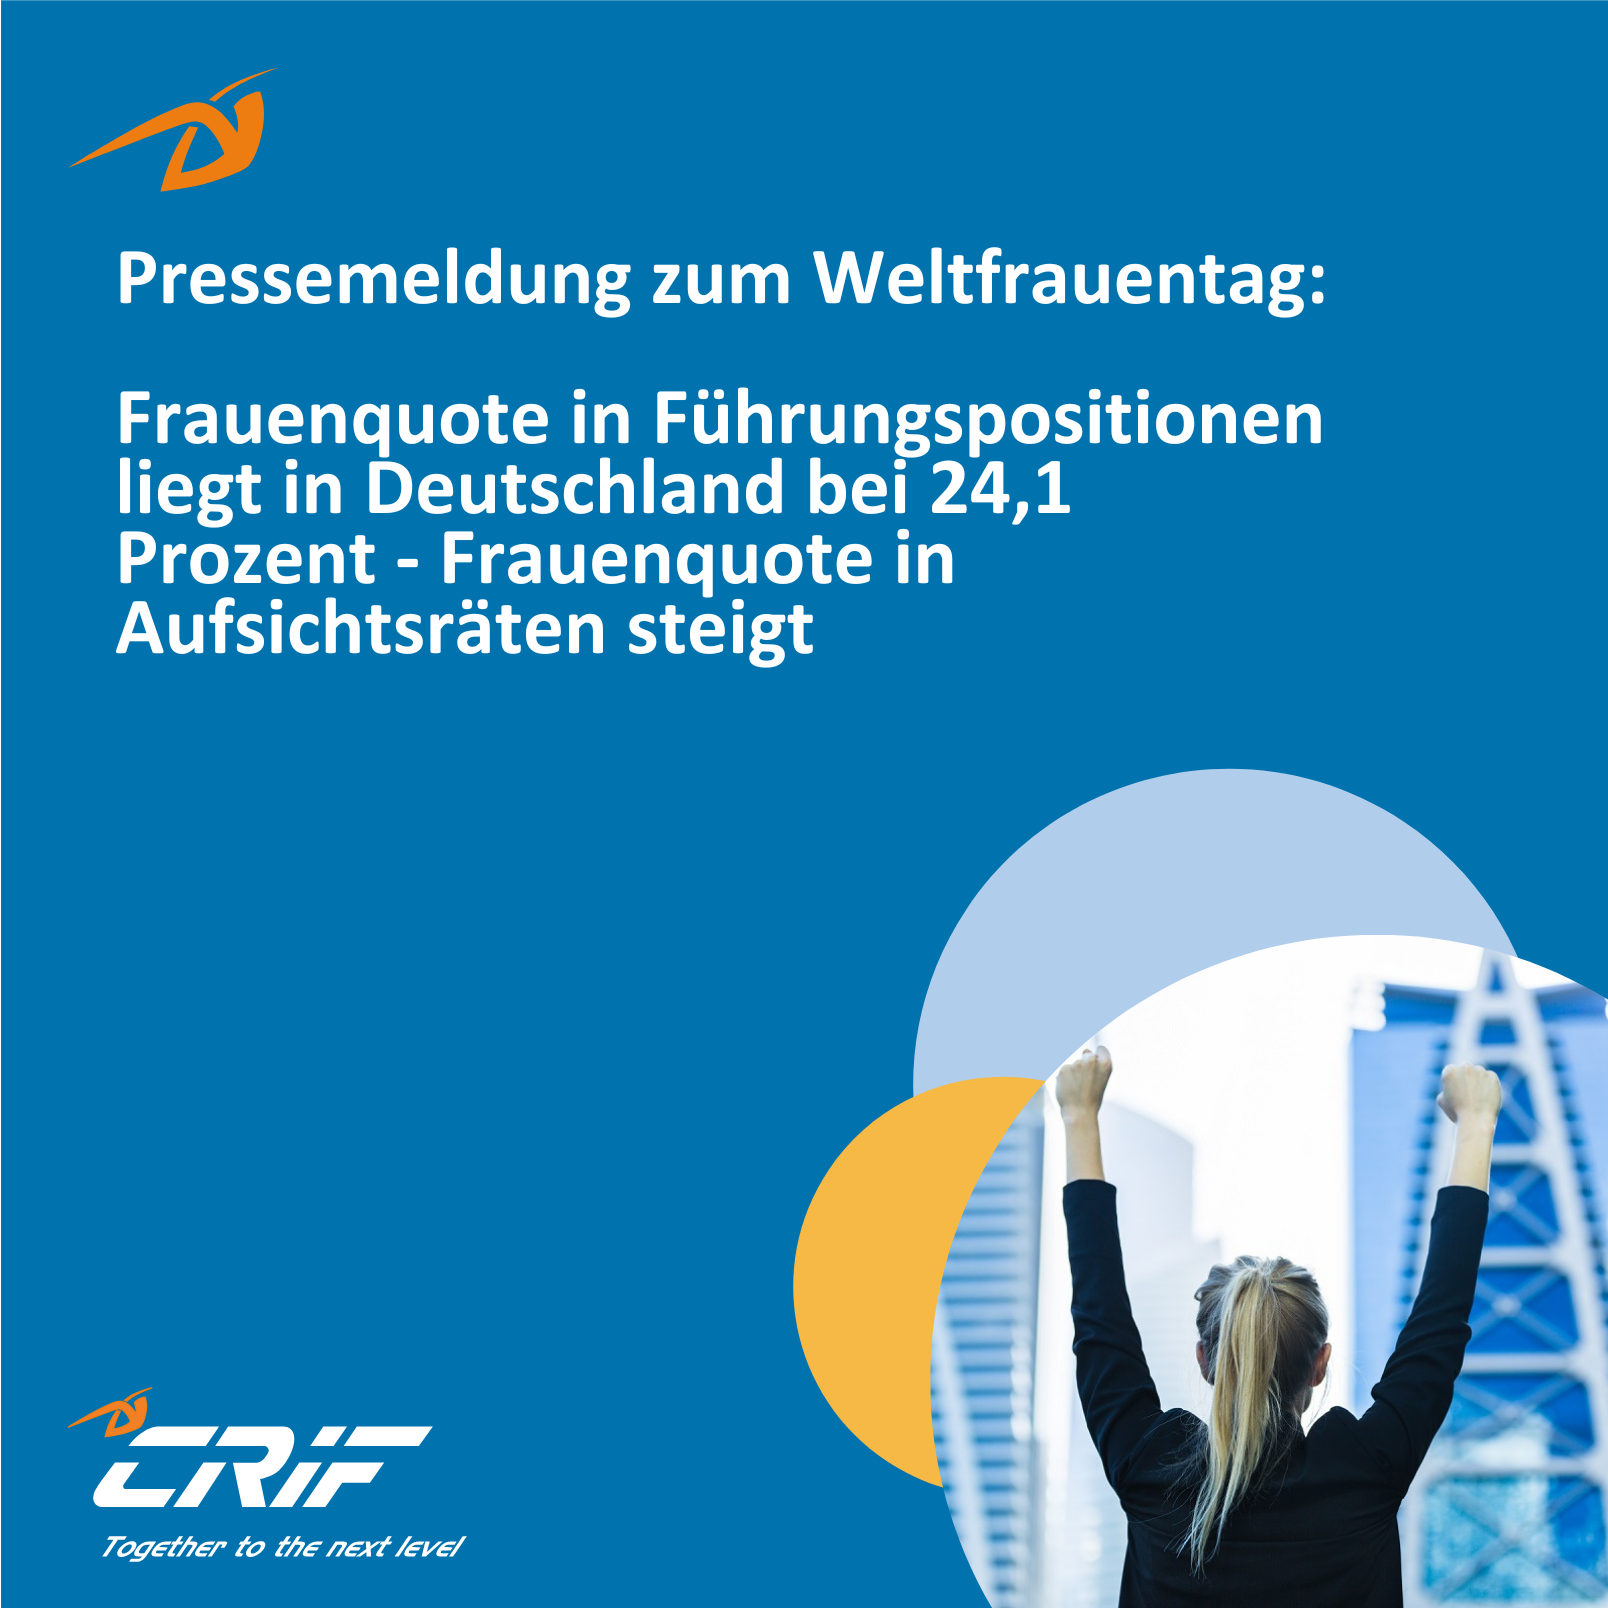 crif-frauenquote-weltfrauentag